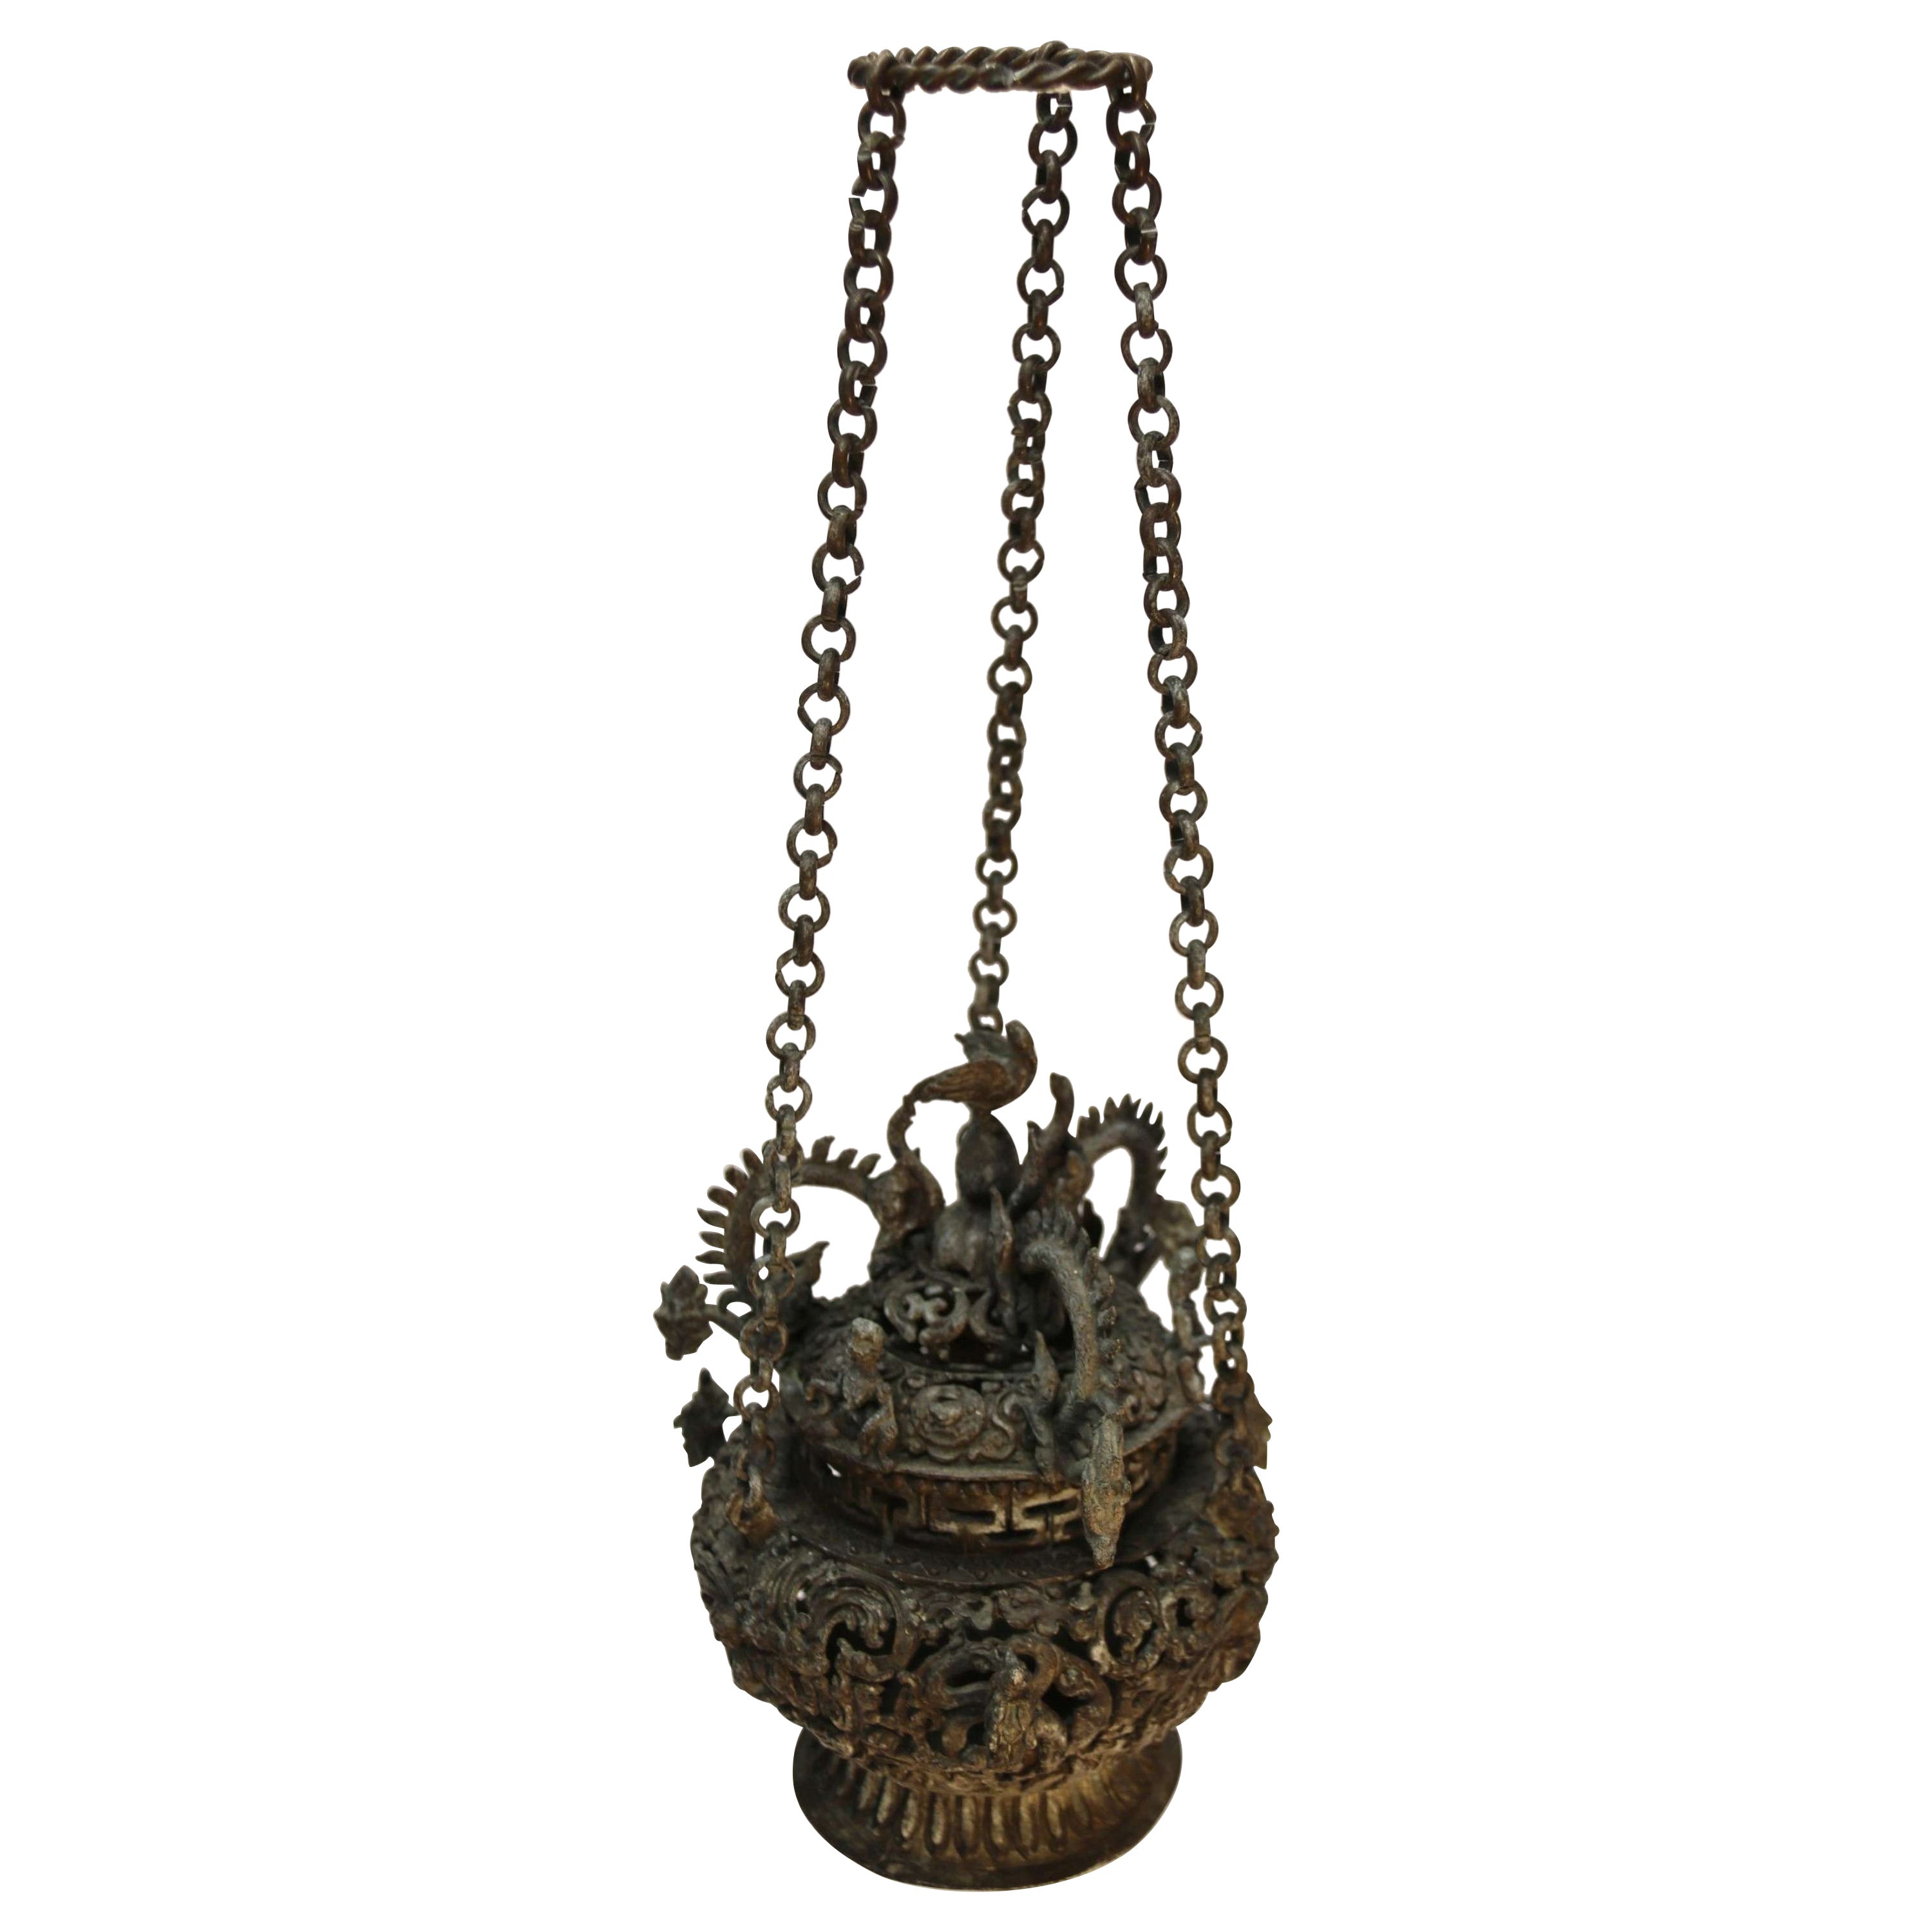 Tibetan Bronze Incense Burner Finely Detailed with Mythical Beasts circa 1910